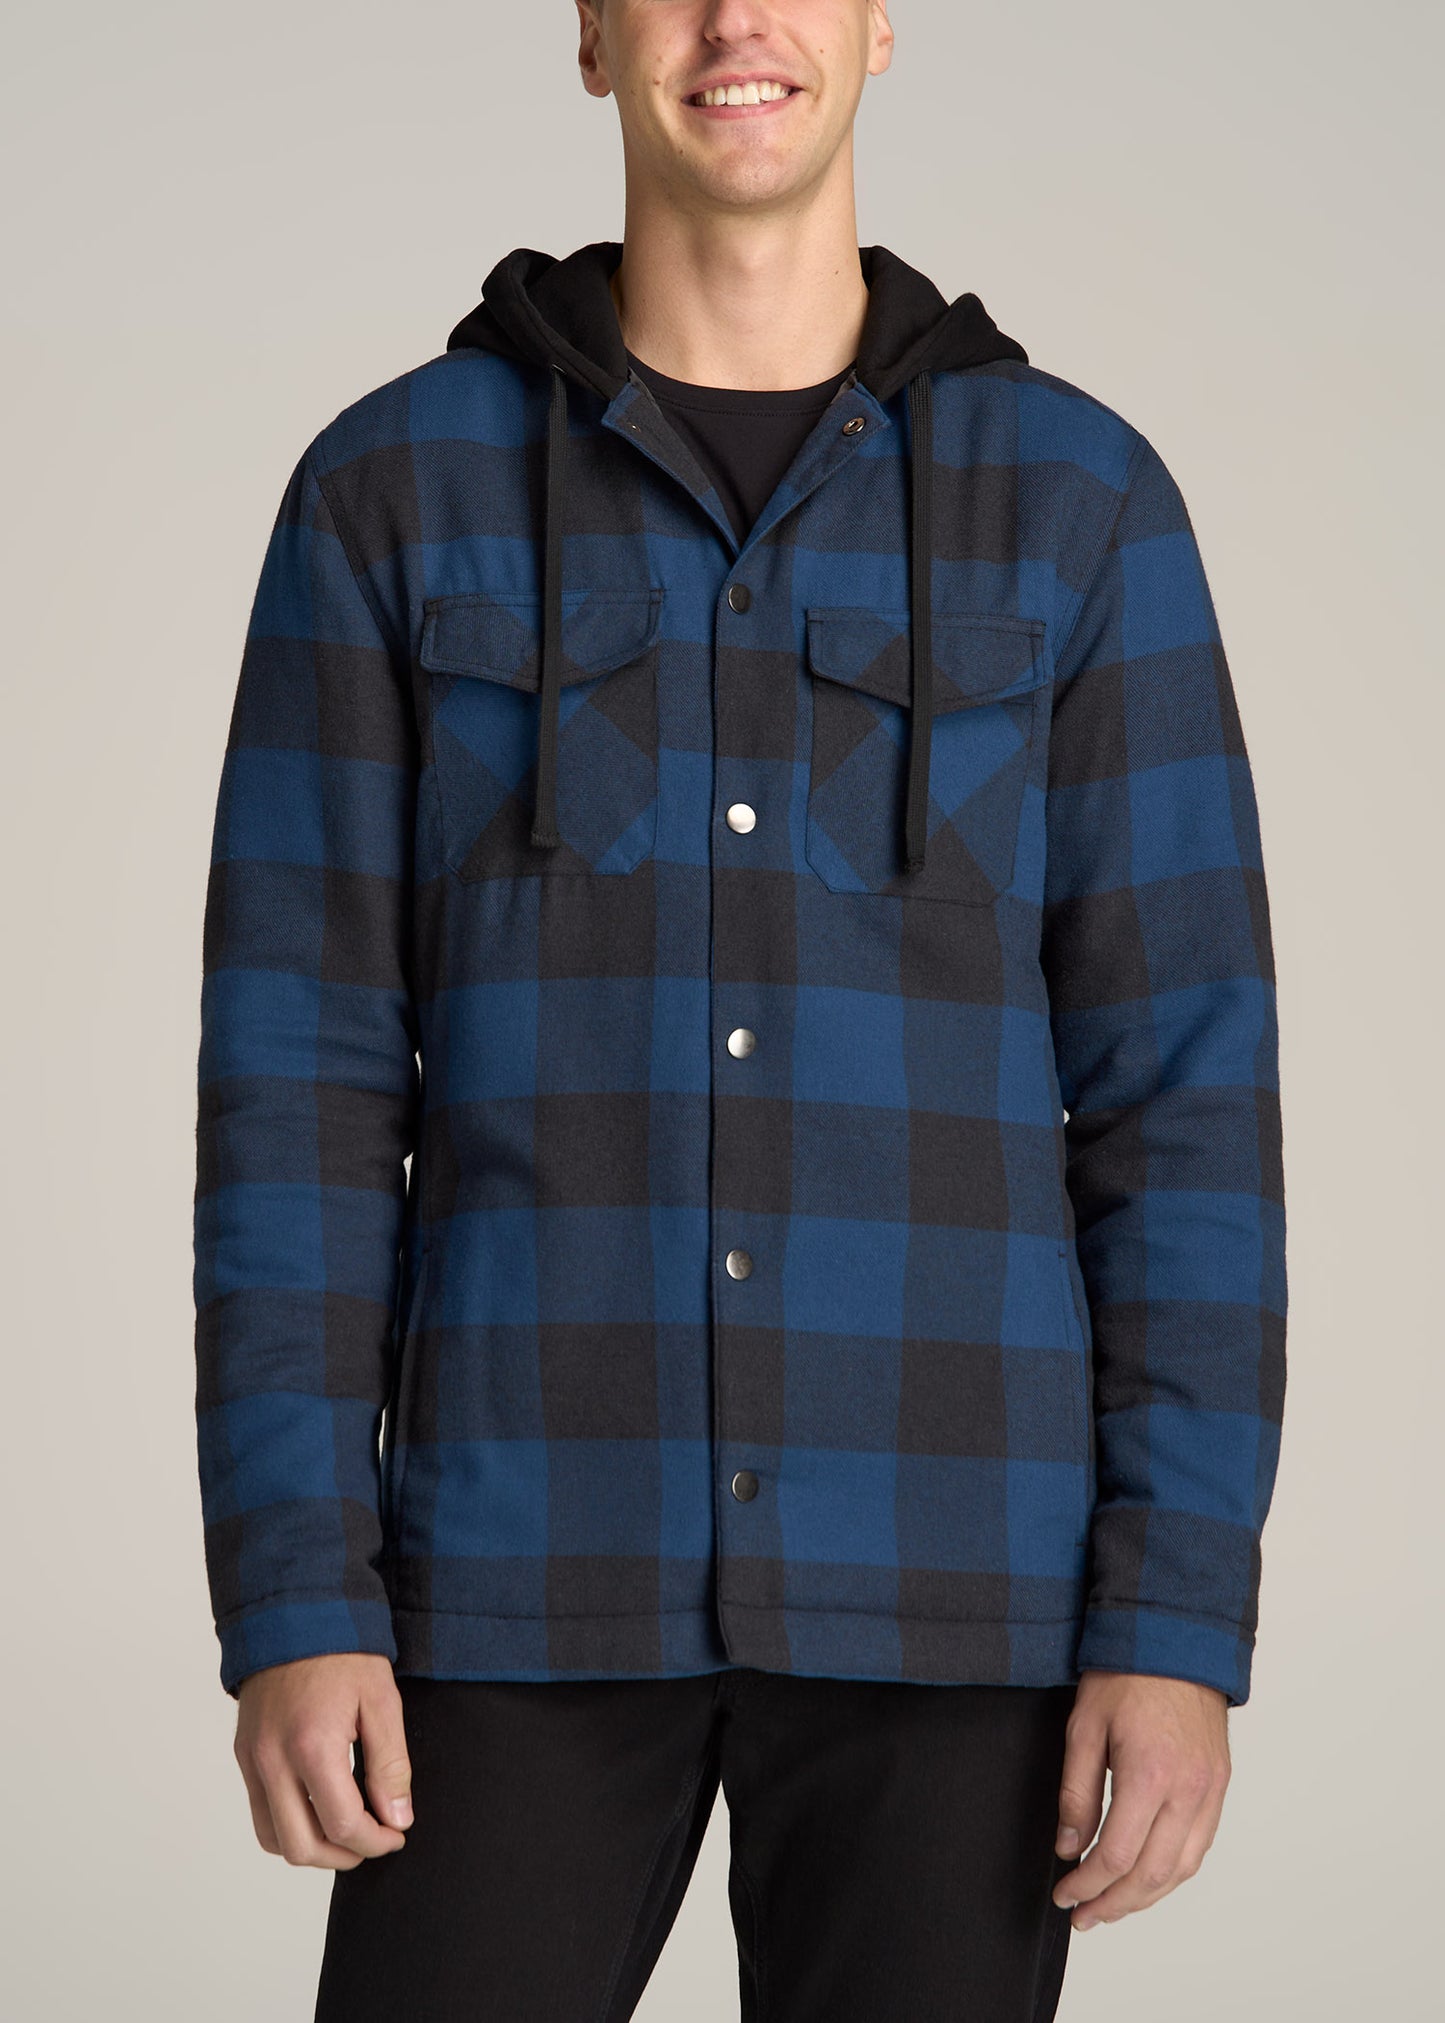 Jamgty Fall Coat for Men Long Sleeve Button Down Plaid India | Ubuy